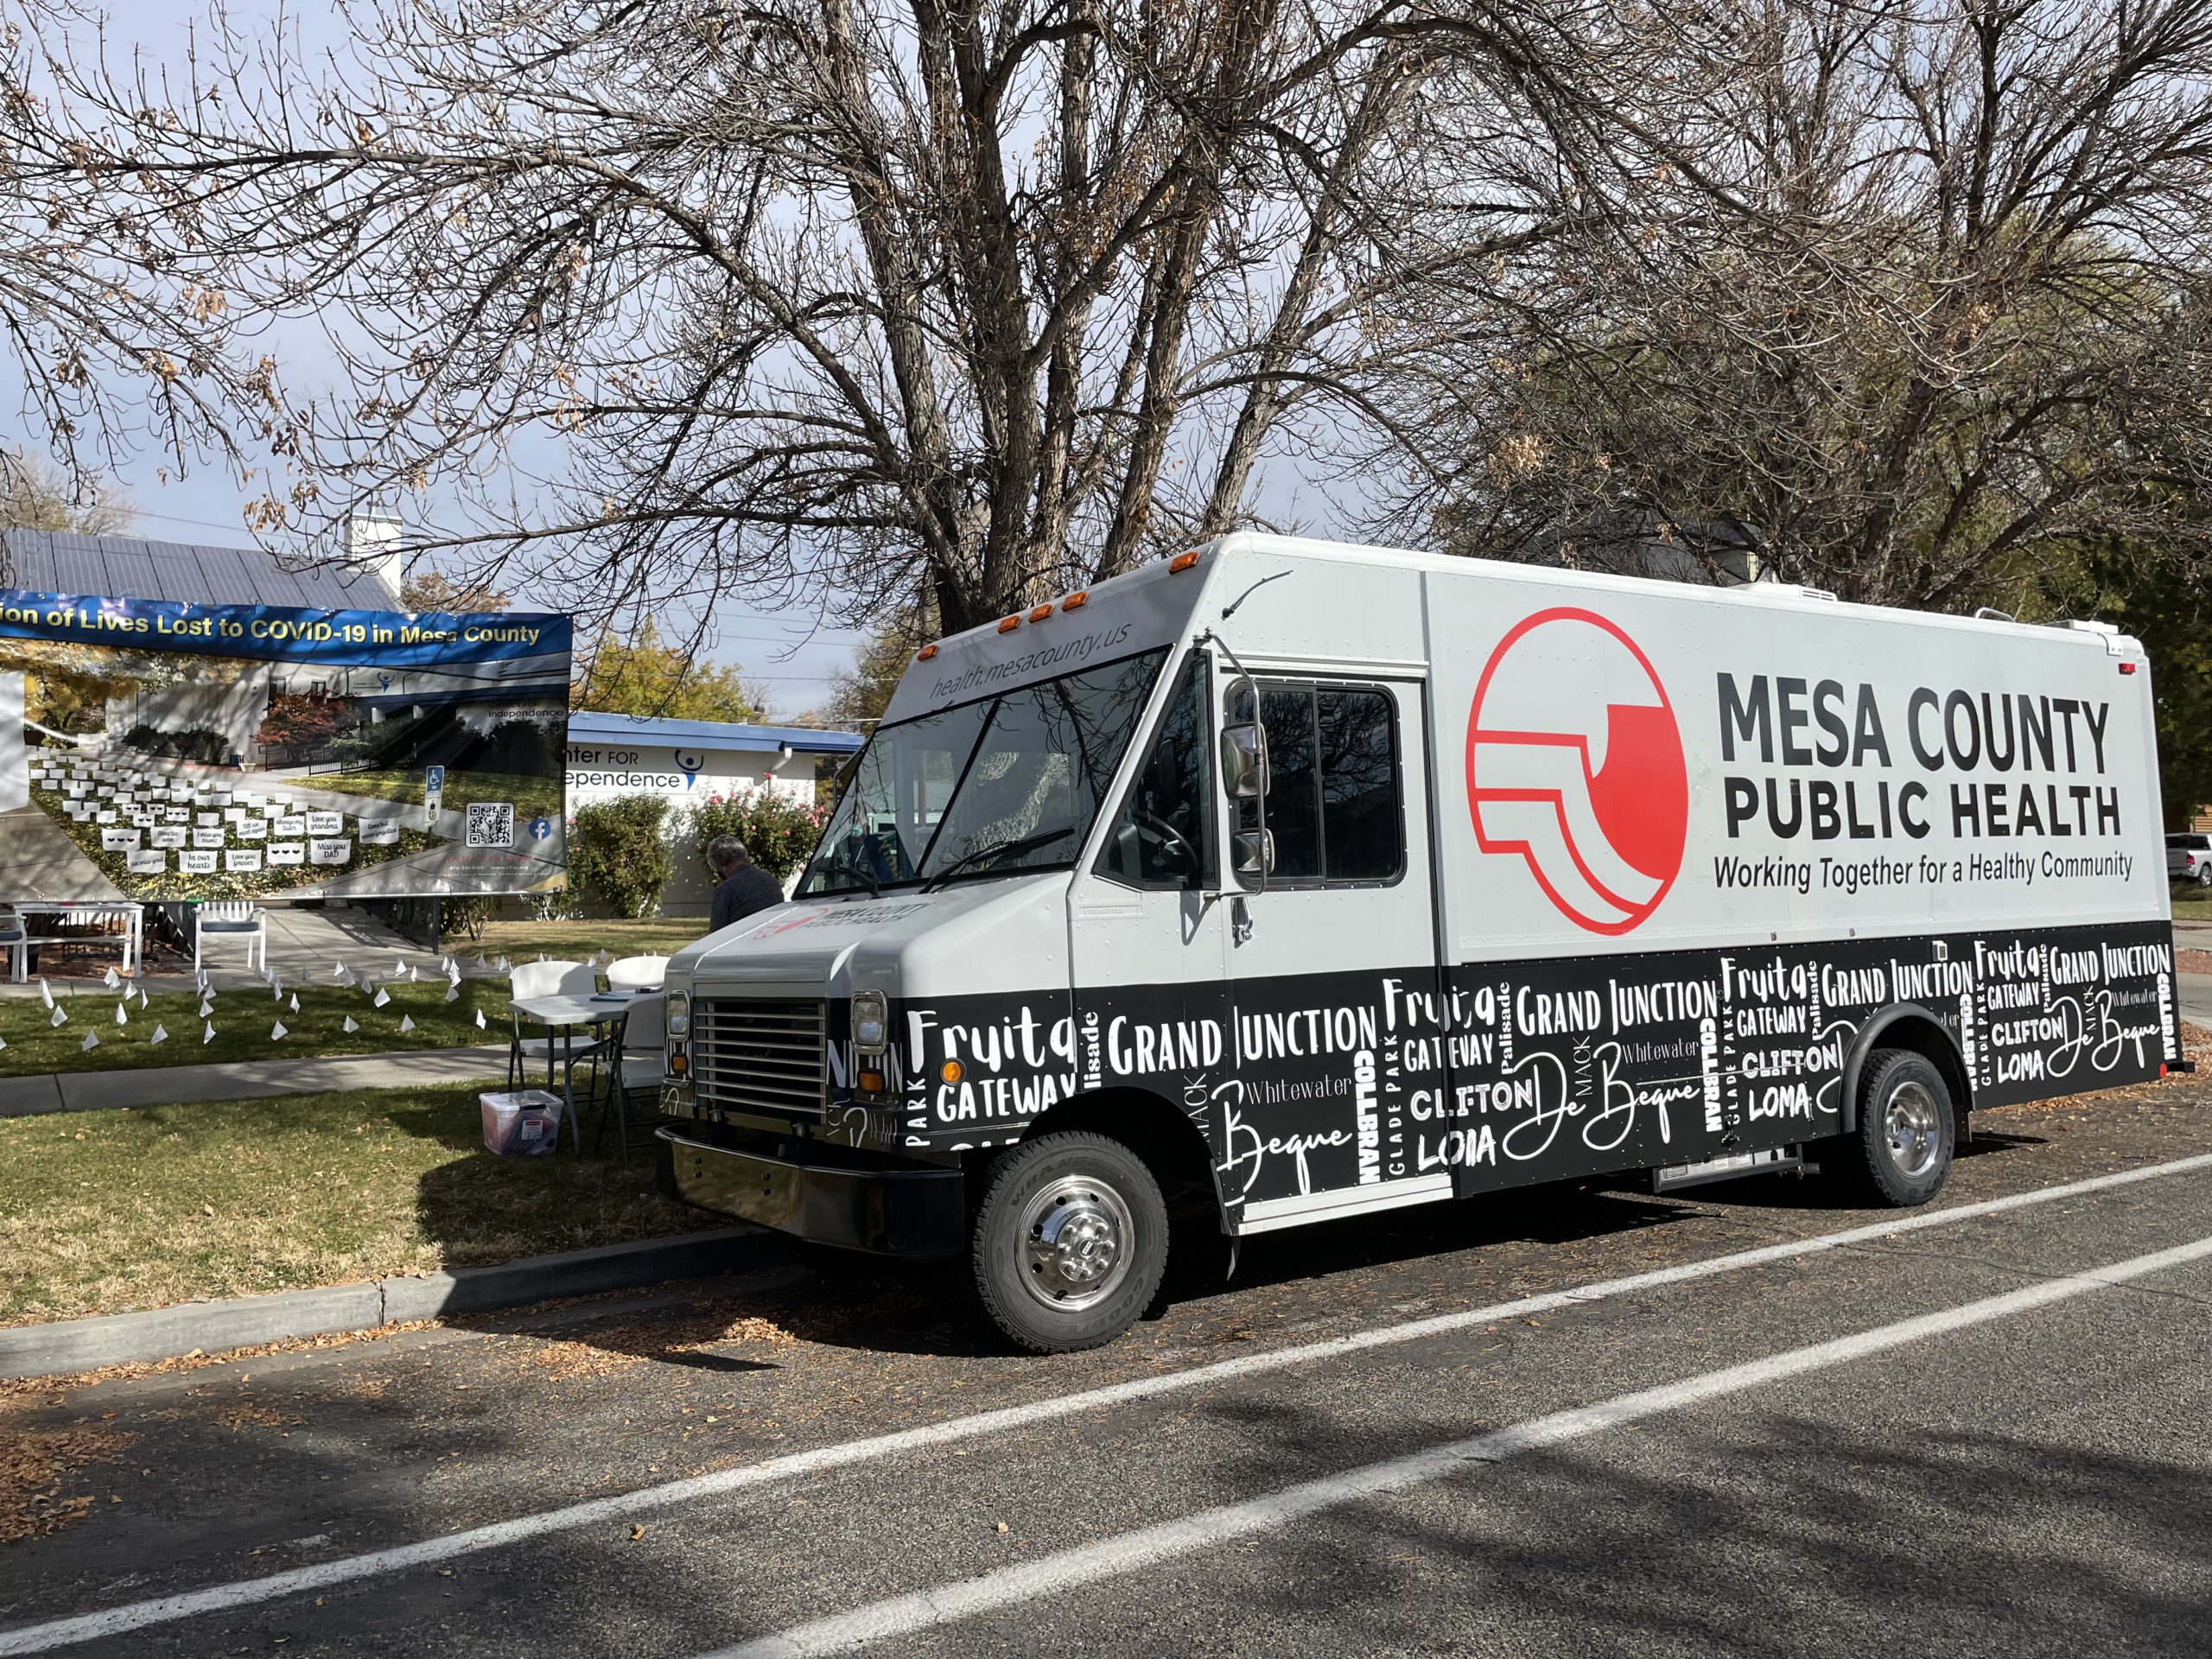 Mesa County Public Health's large mobile vaccine clinic parked in front of Center for Independence ready to offer vaccines to people.